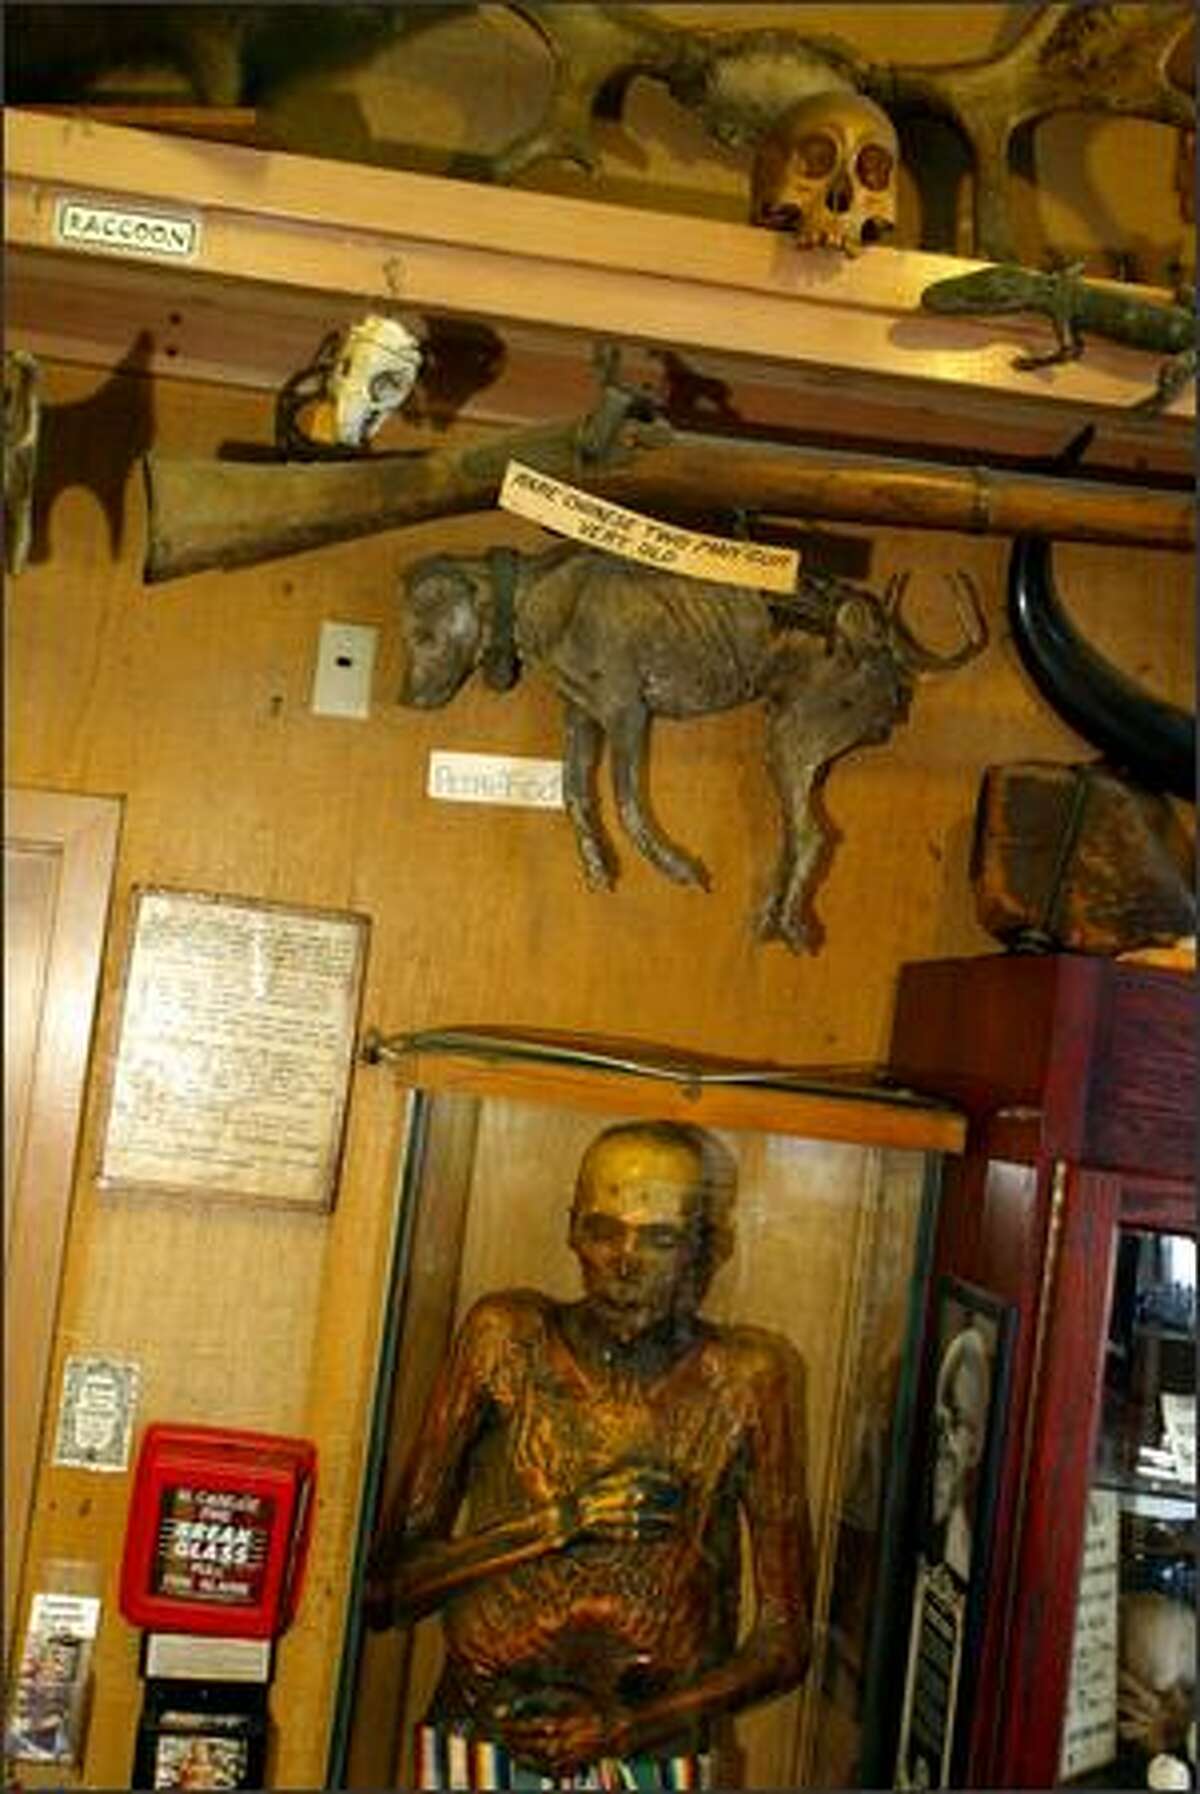 Our fascination with death is not a recent development. Ye Olde Curiosity Shop on the Seattle waterfront has had Sylvester the mummy on display since 1955.